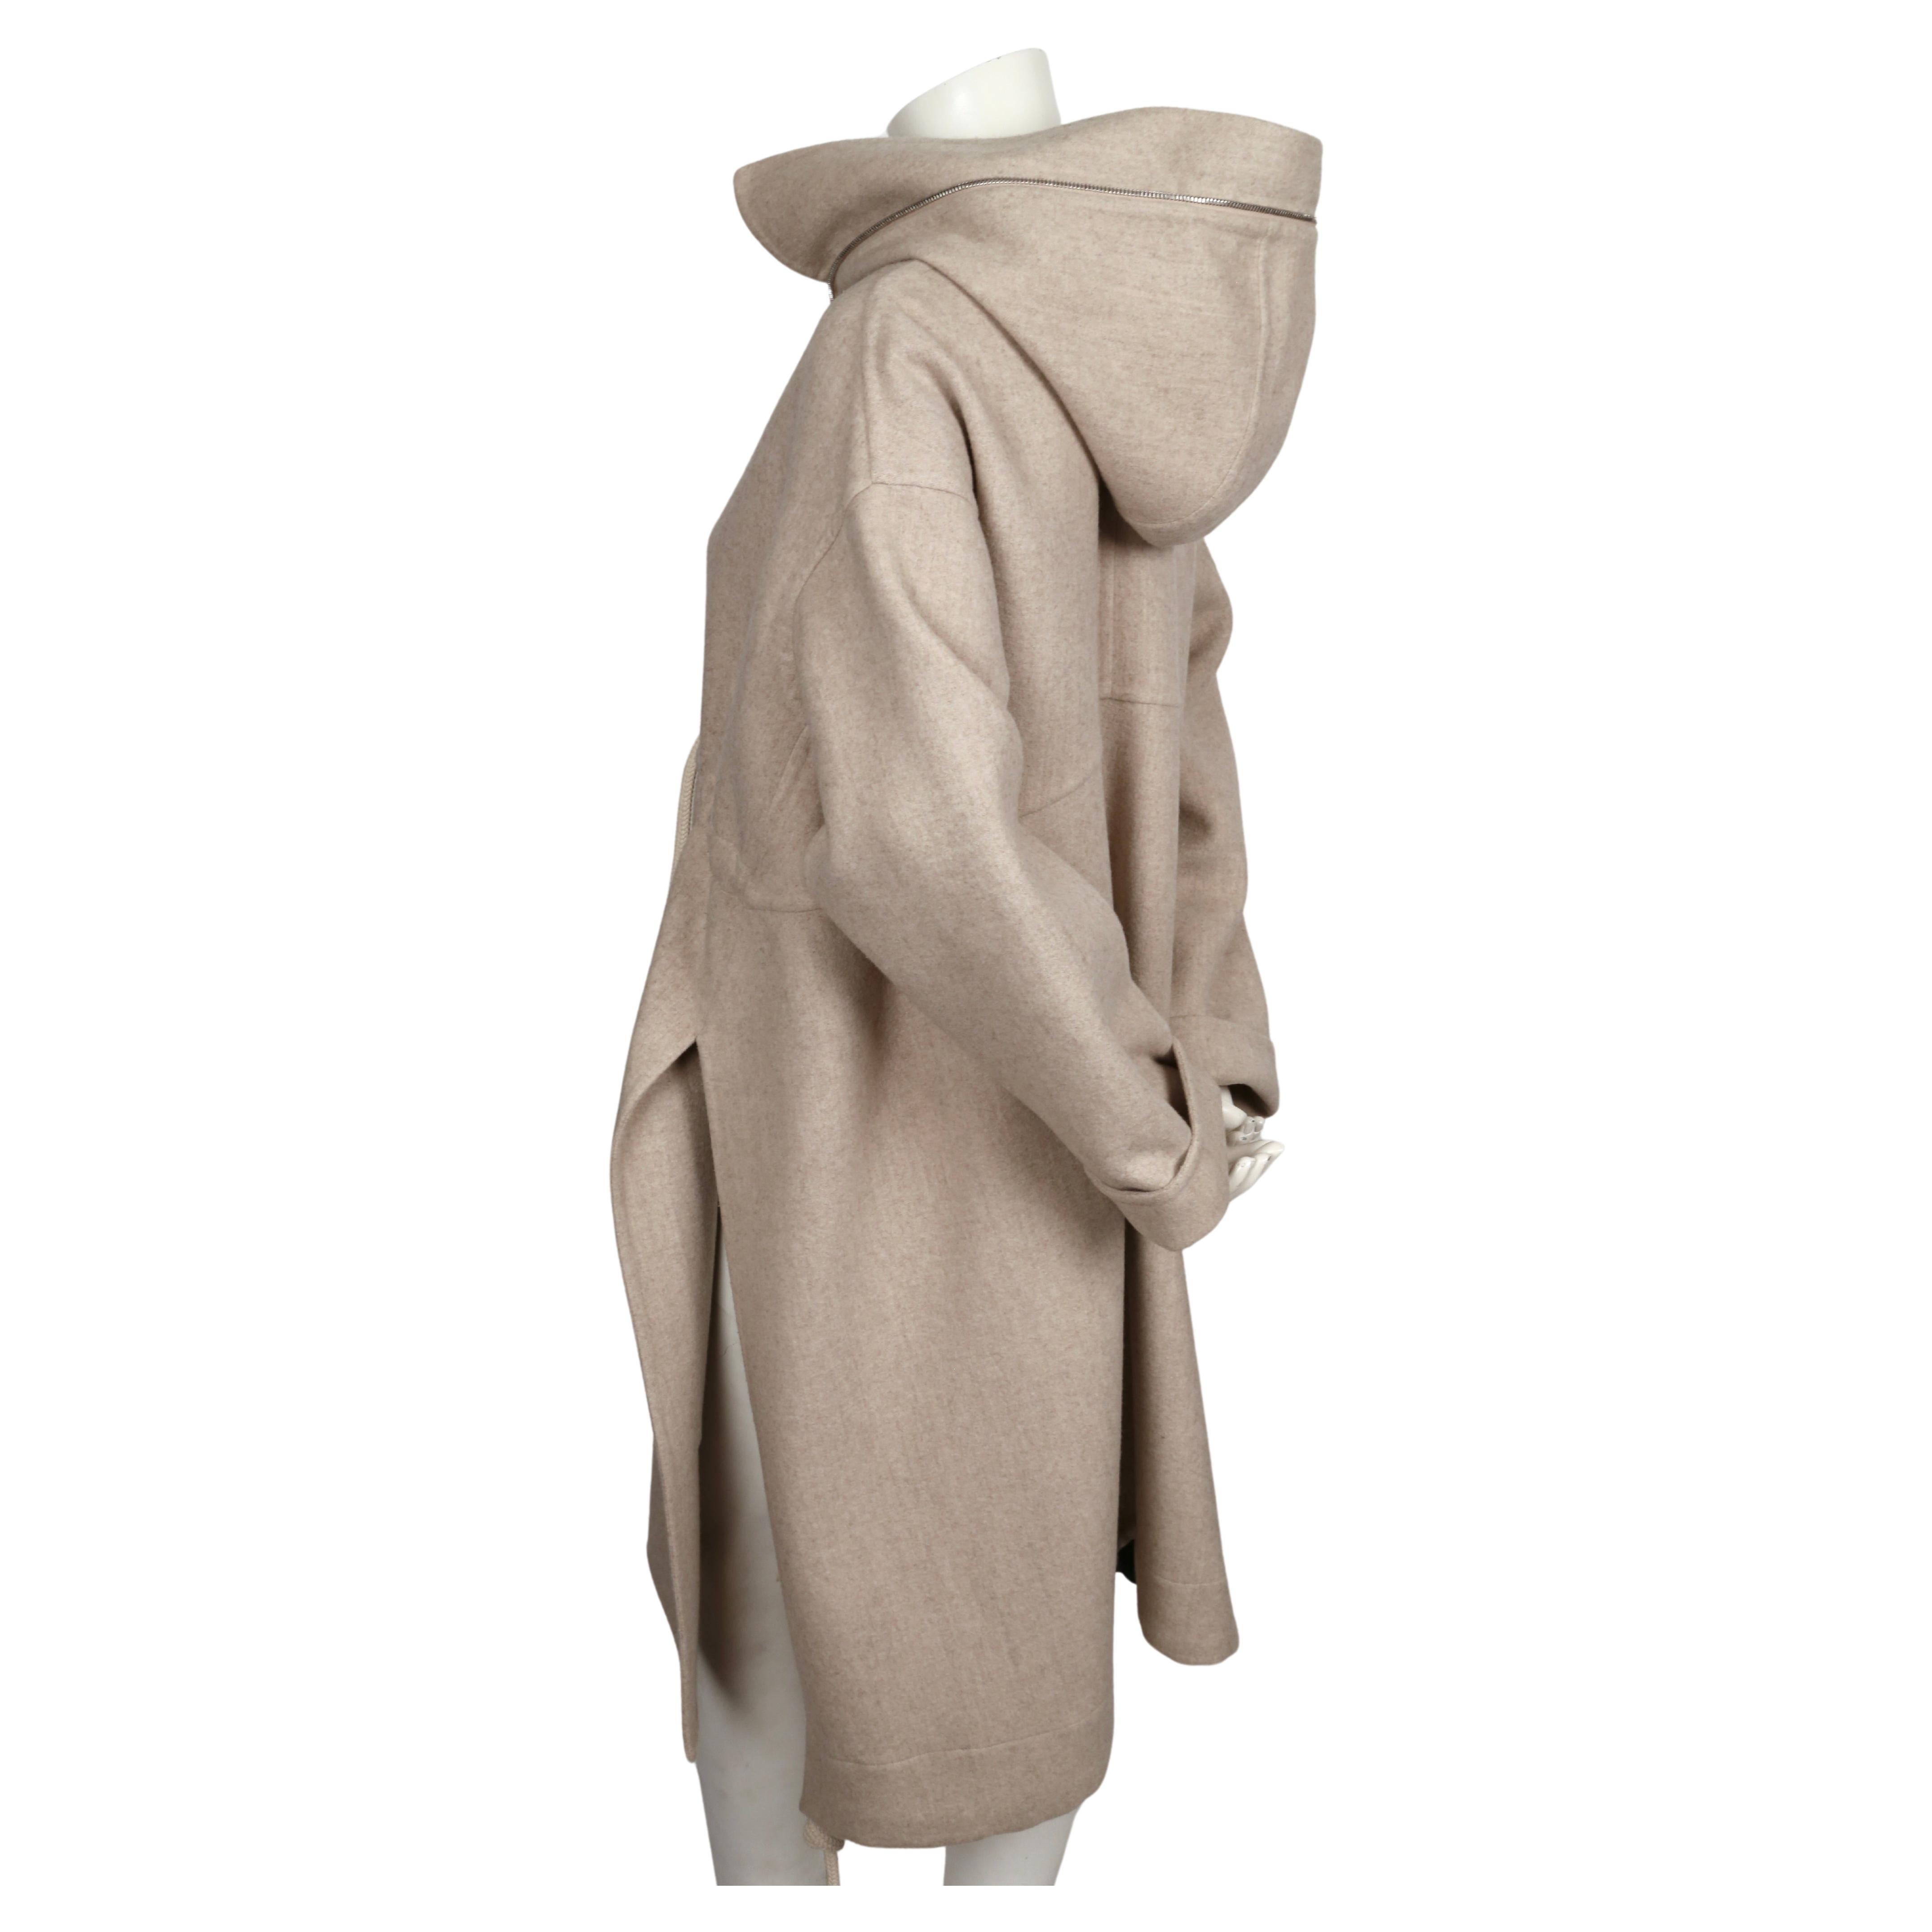 Women's or Men's CELINE by PHOEBE PHILO oatmeal wool and cashmere coat with hood - resort 2016 For Sale